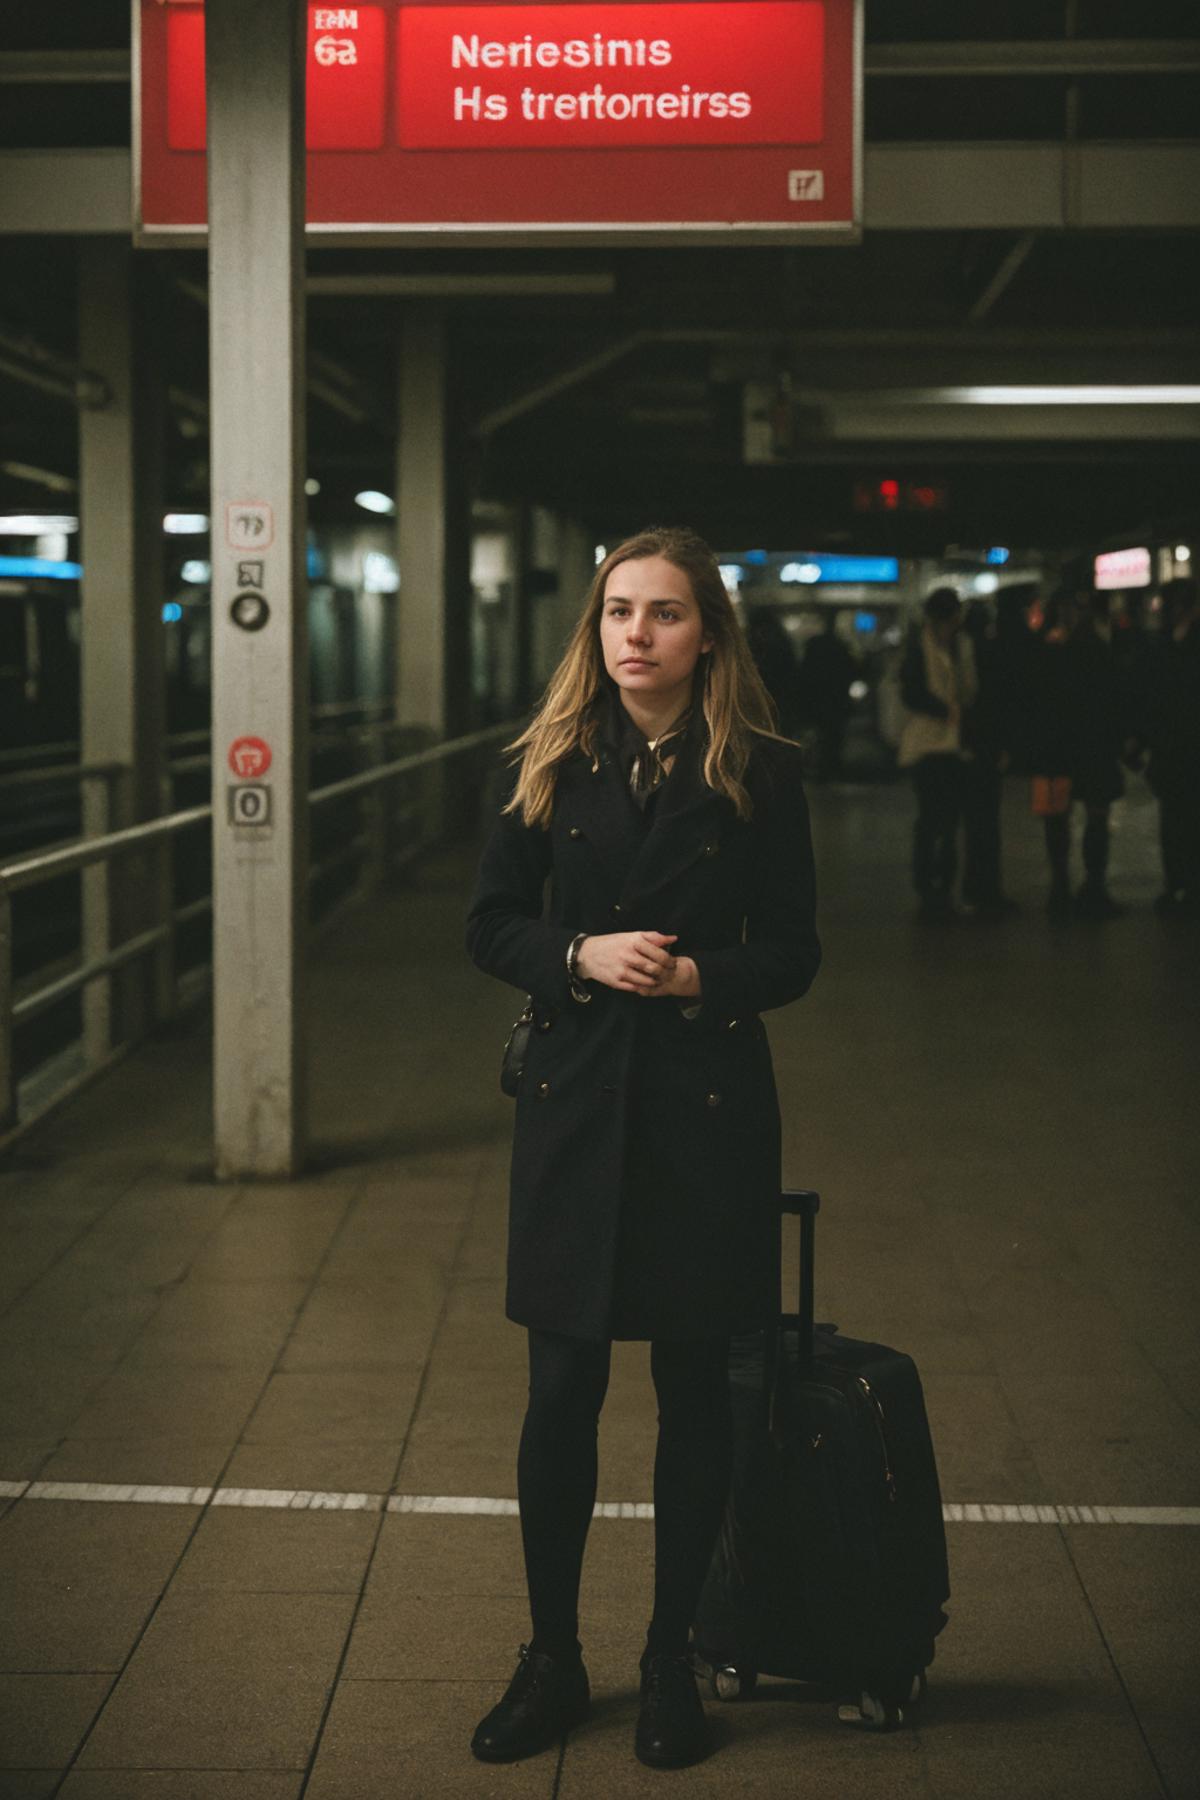 A woman wearing a black coat stands with her luggage in a train station.